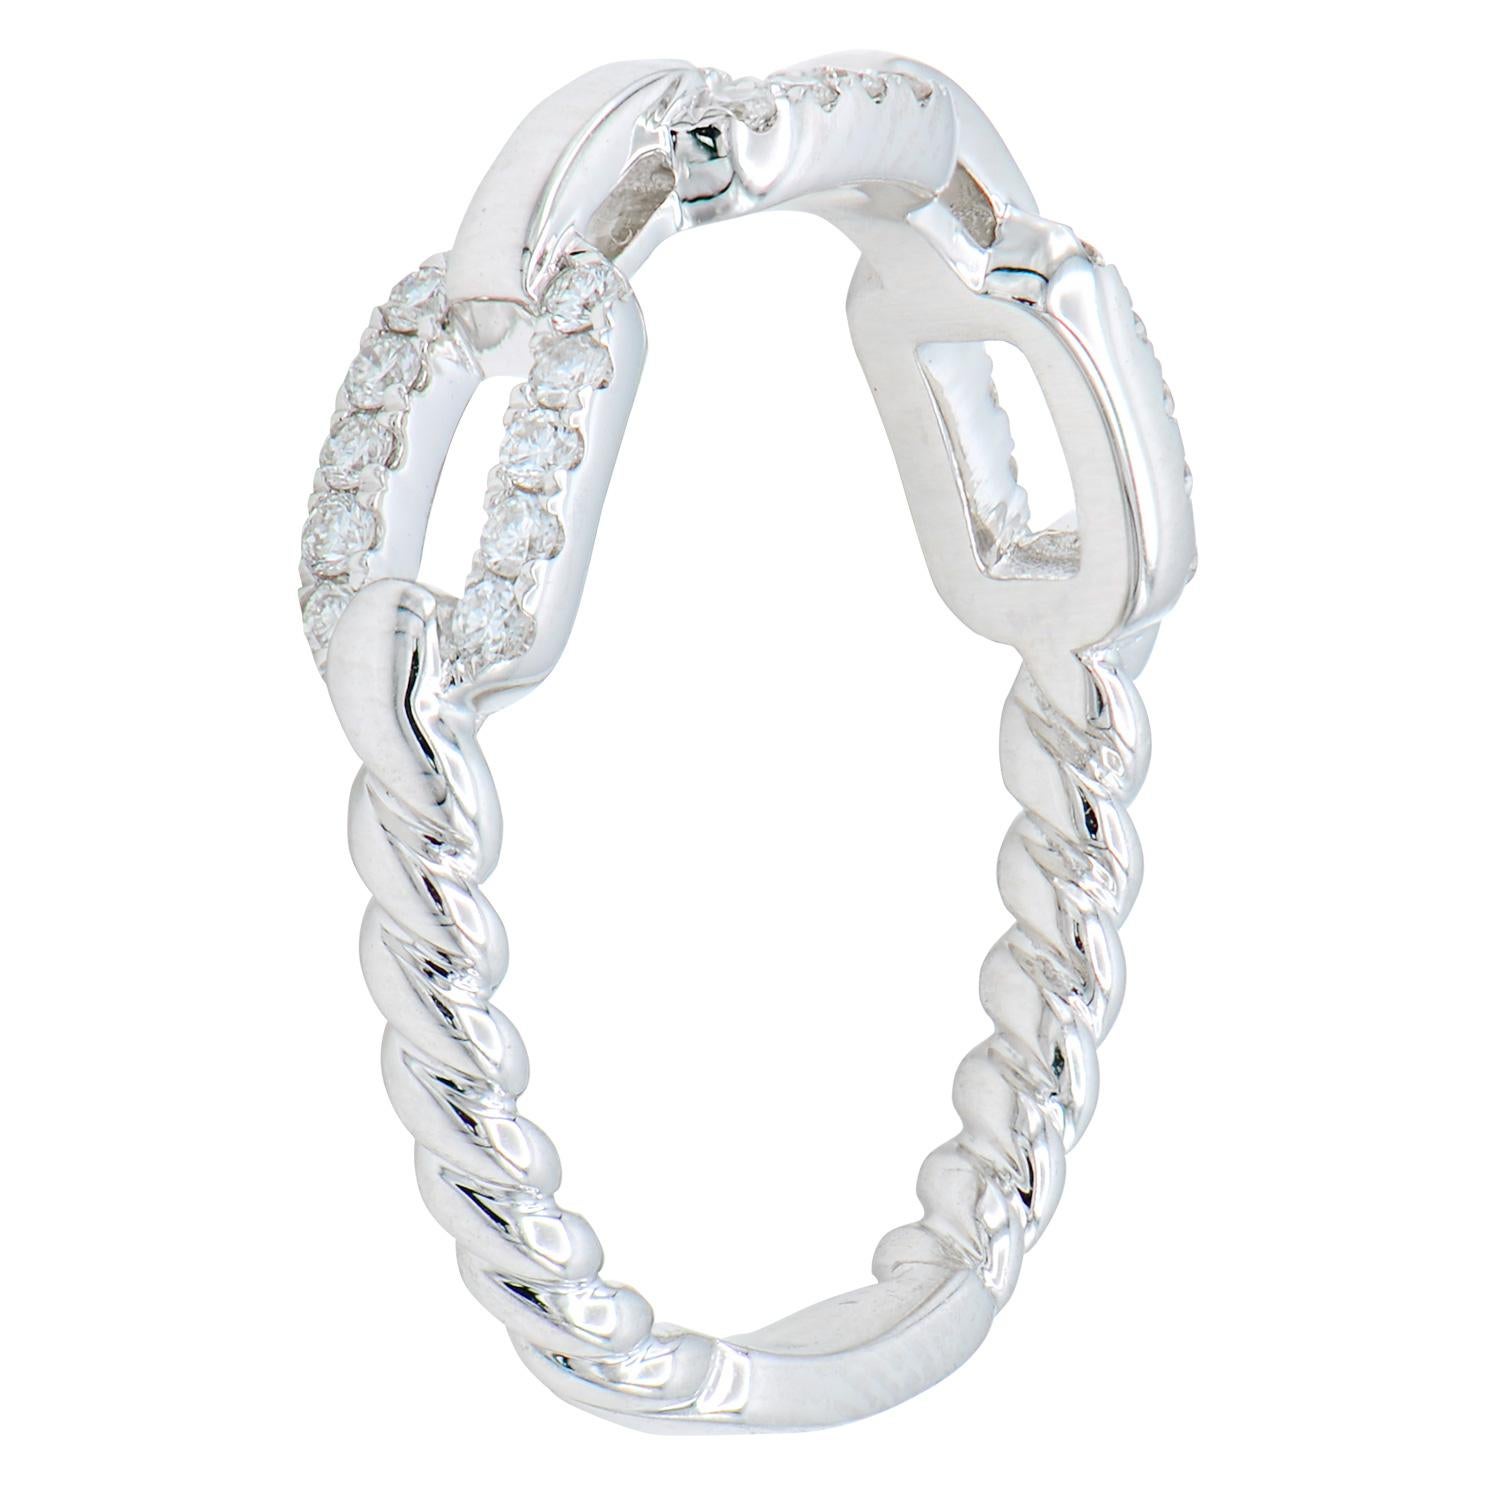 This modern, fun ring is made from 2.9 grams of 18 karat white gold. The back of the ring features a twist-like effect and the front features a chain-link design. The ring contains 30 round VS2, G color diamonds totaling 0.23 carats. This ring is